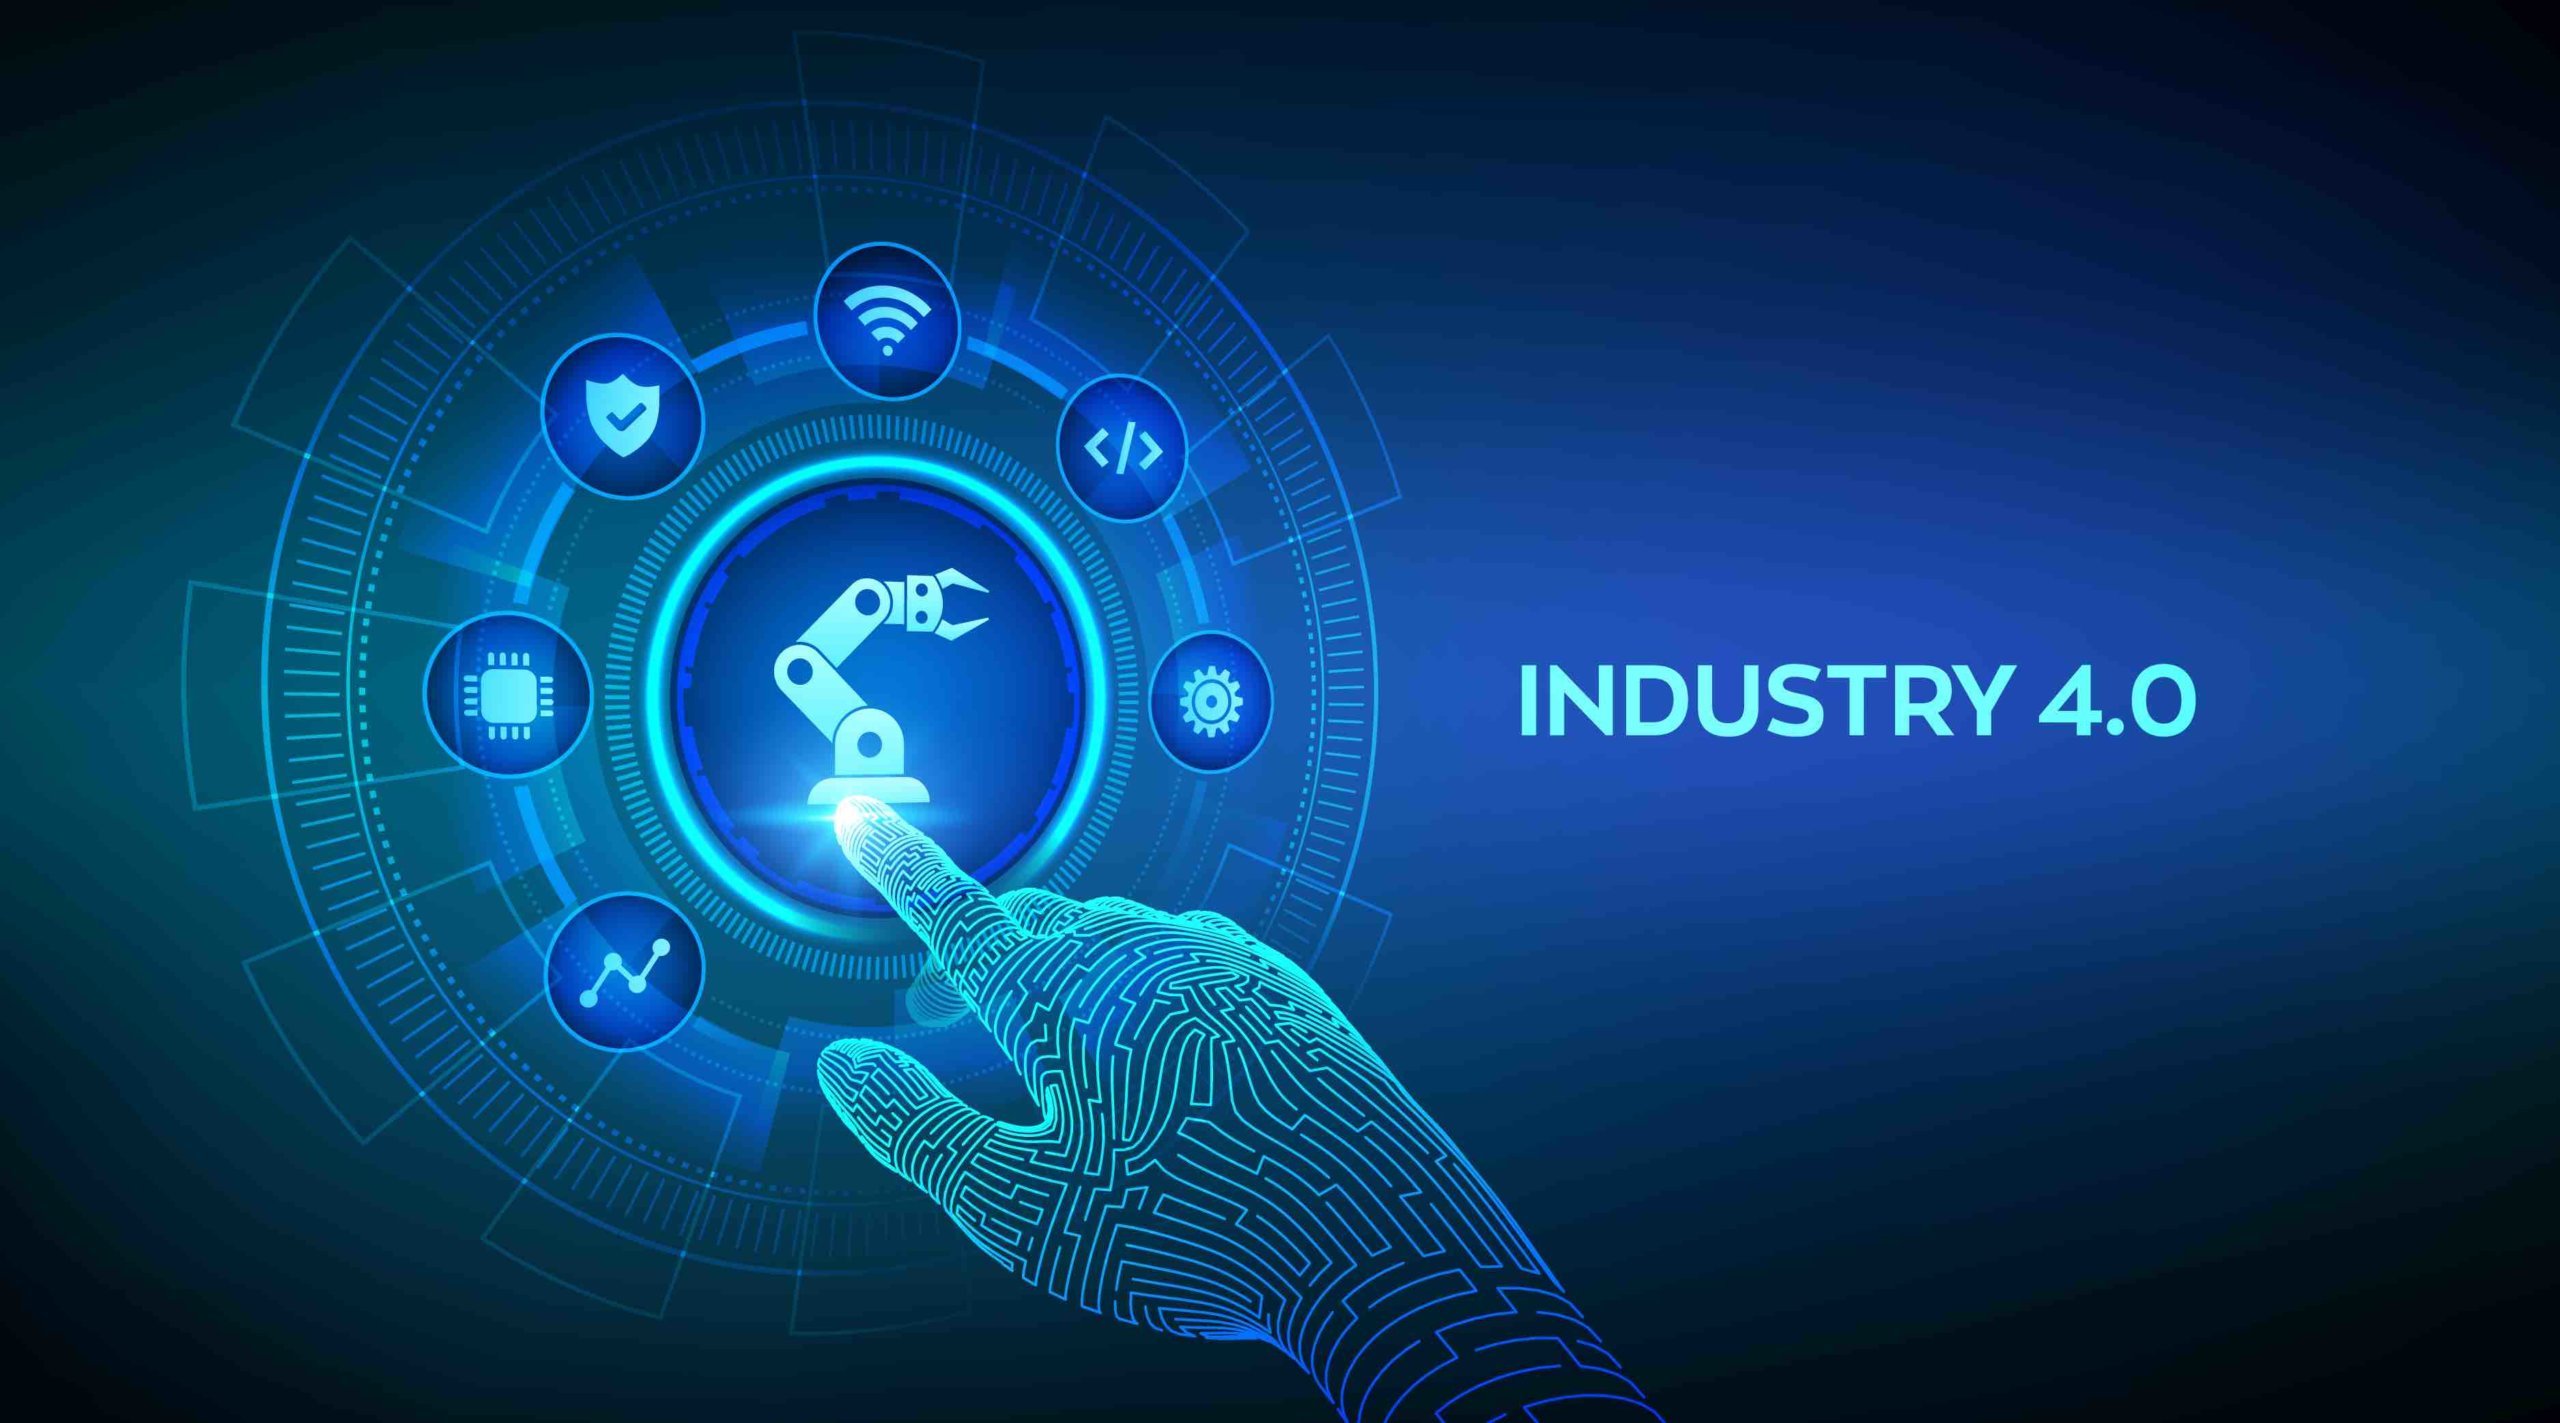 7 KEY STEPS TO SECURE YOUR FUTURE IN THE INDUSTRY 4.0 REVOLUTION